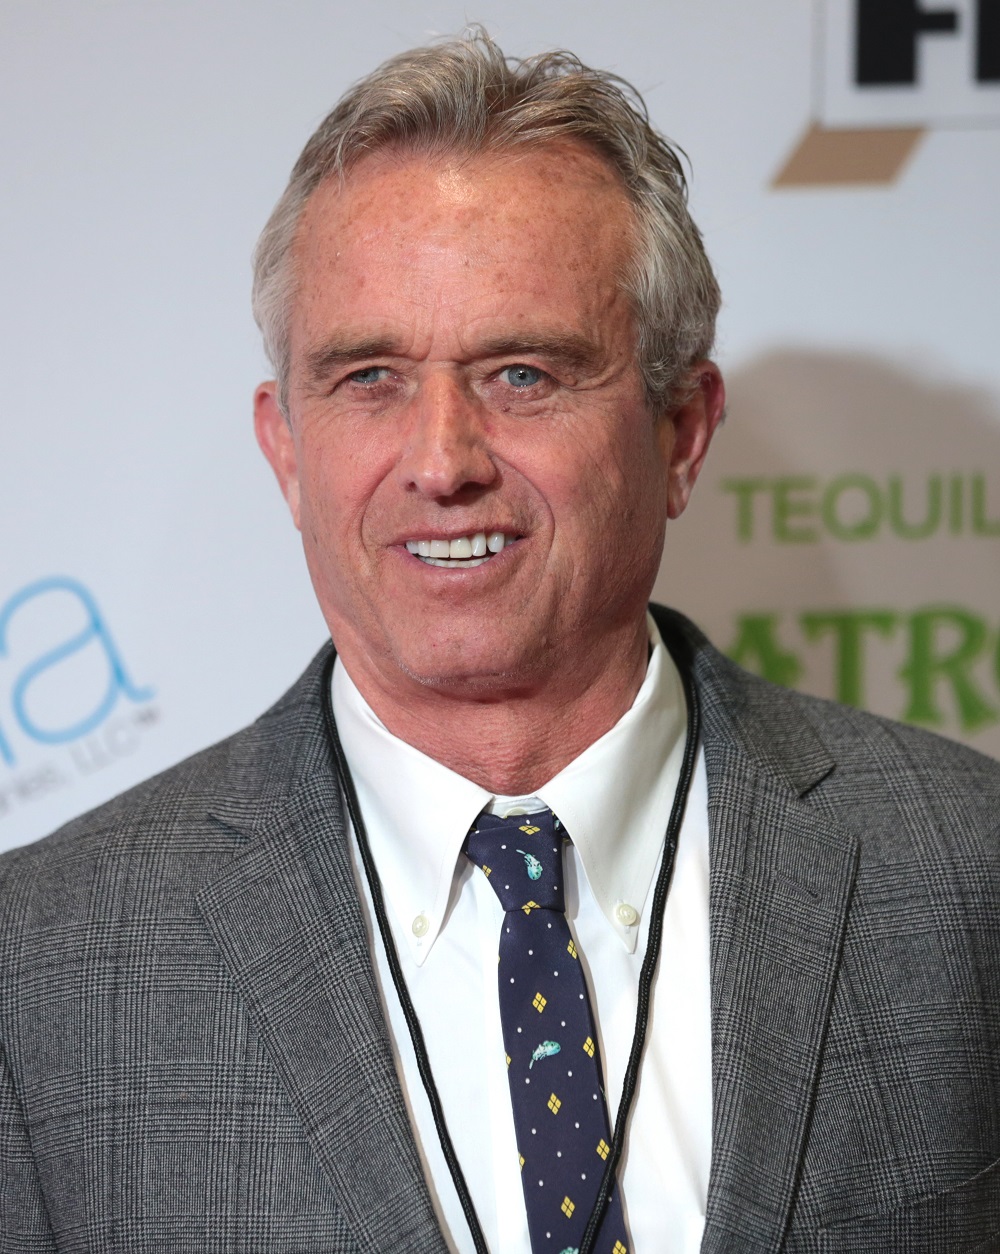 Presidential candidate RFK Jr said he had a brain worm in 2012, New York Times reports